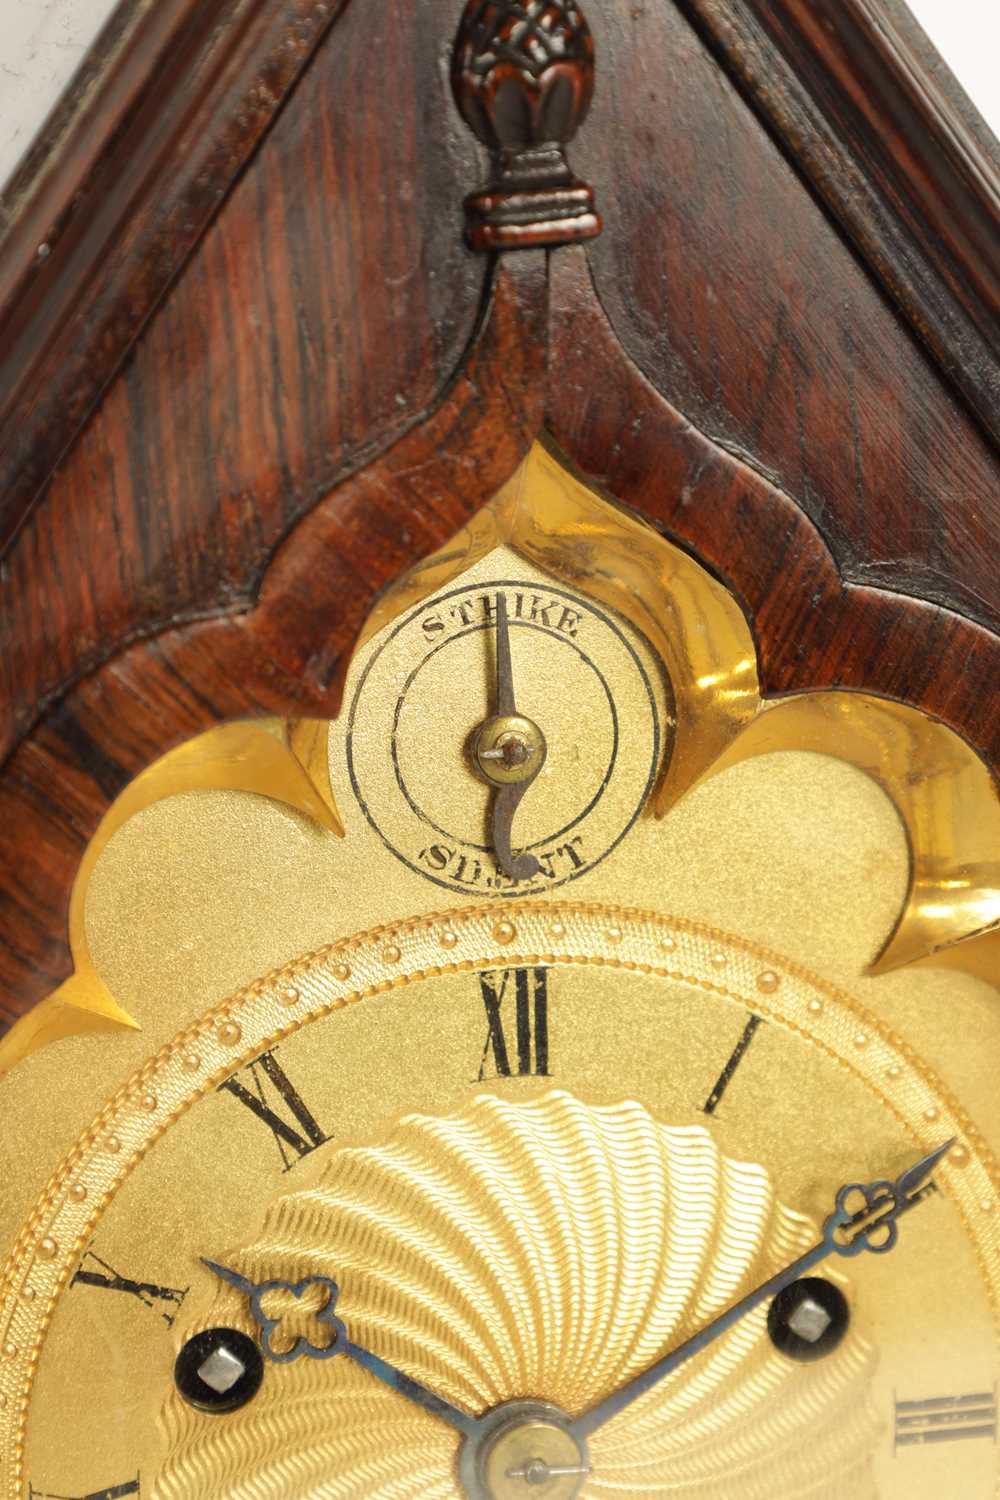 VINER & CO. LONDON. A 19TH CENTURY ROSEWOOD CASED GOTHIC REVIVAL DOUBLE FUSEE MANTEL CLOCK OF SMALL - Image 2 of 7